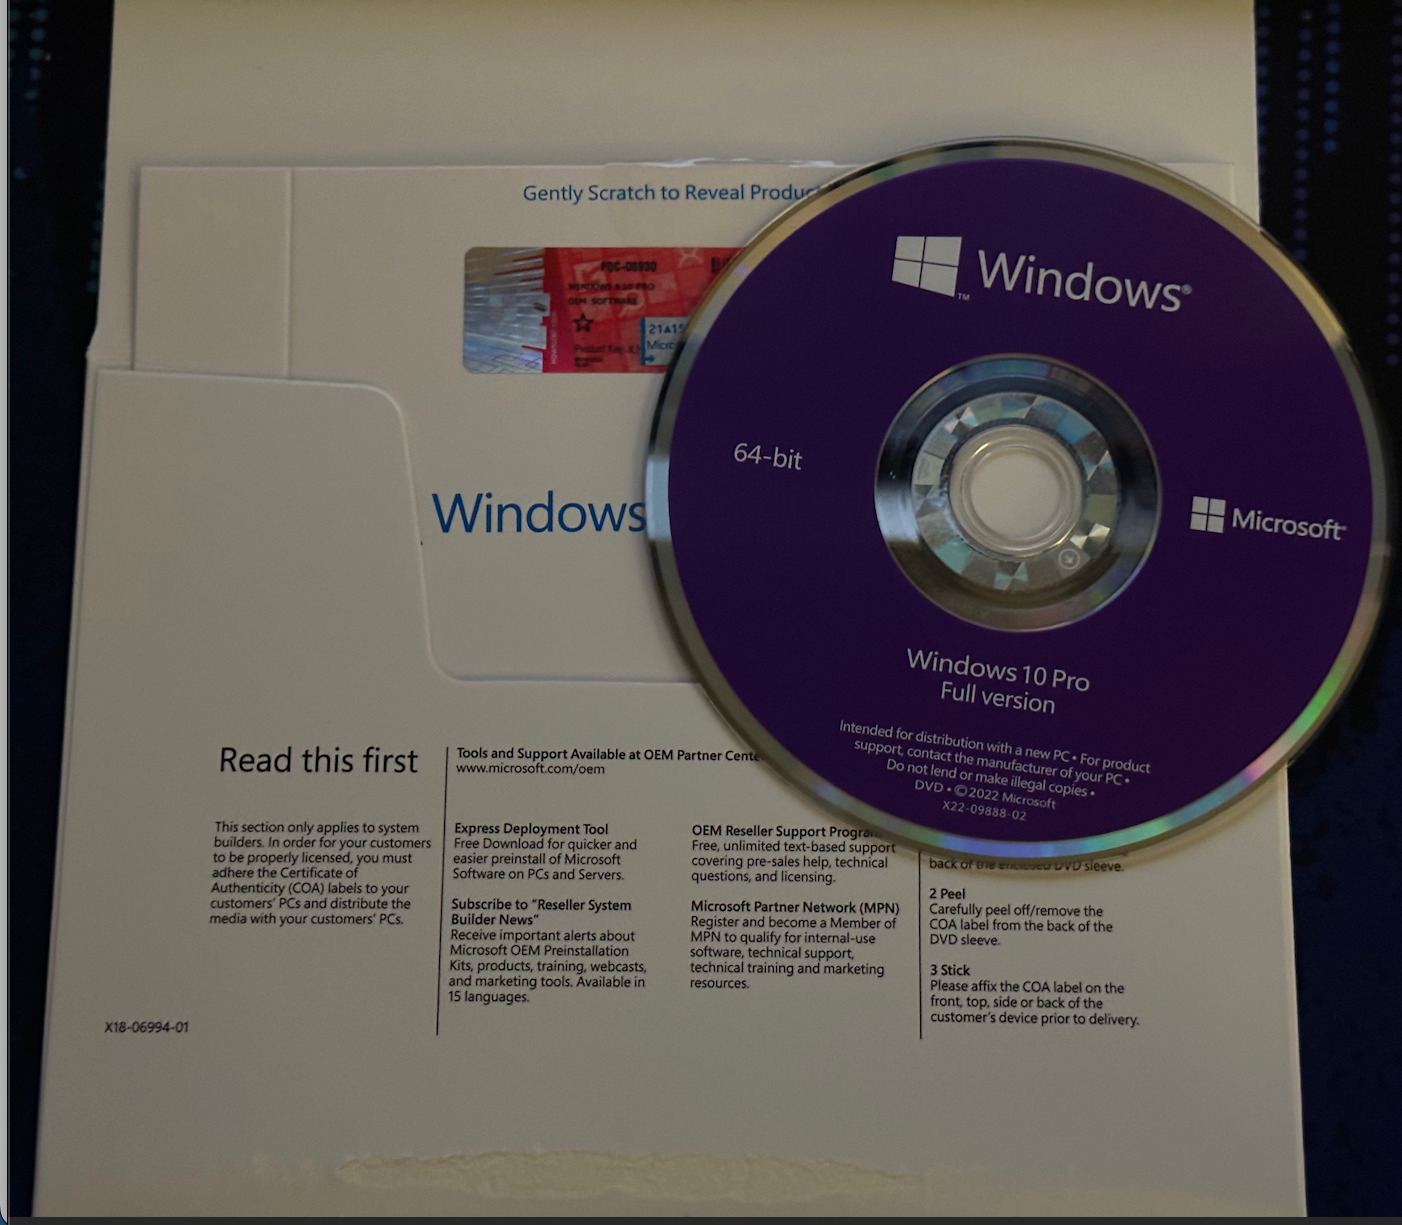 WlNDOWS Win 10 64 bit Install Dvd with Genuine License Product Key